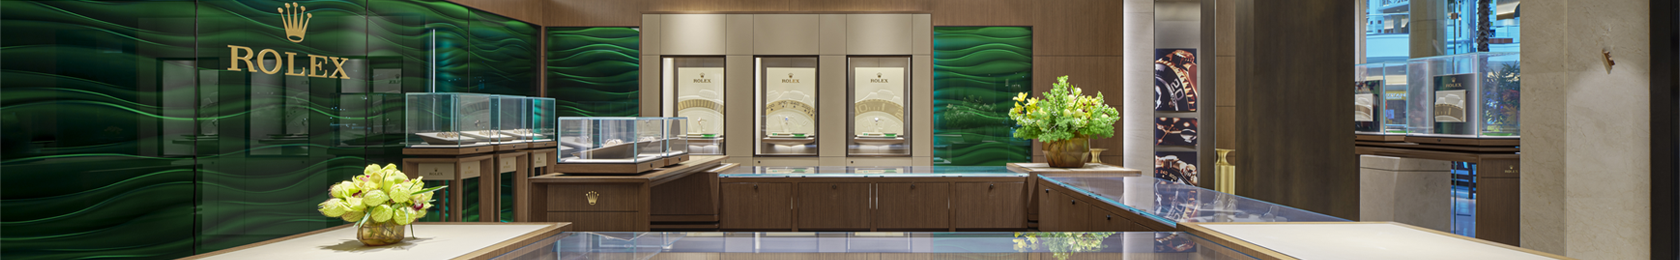 Rolex Shop-in-shop at Tapper's Jewelry Somerset Collection.jpg